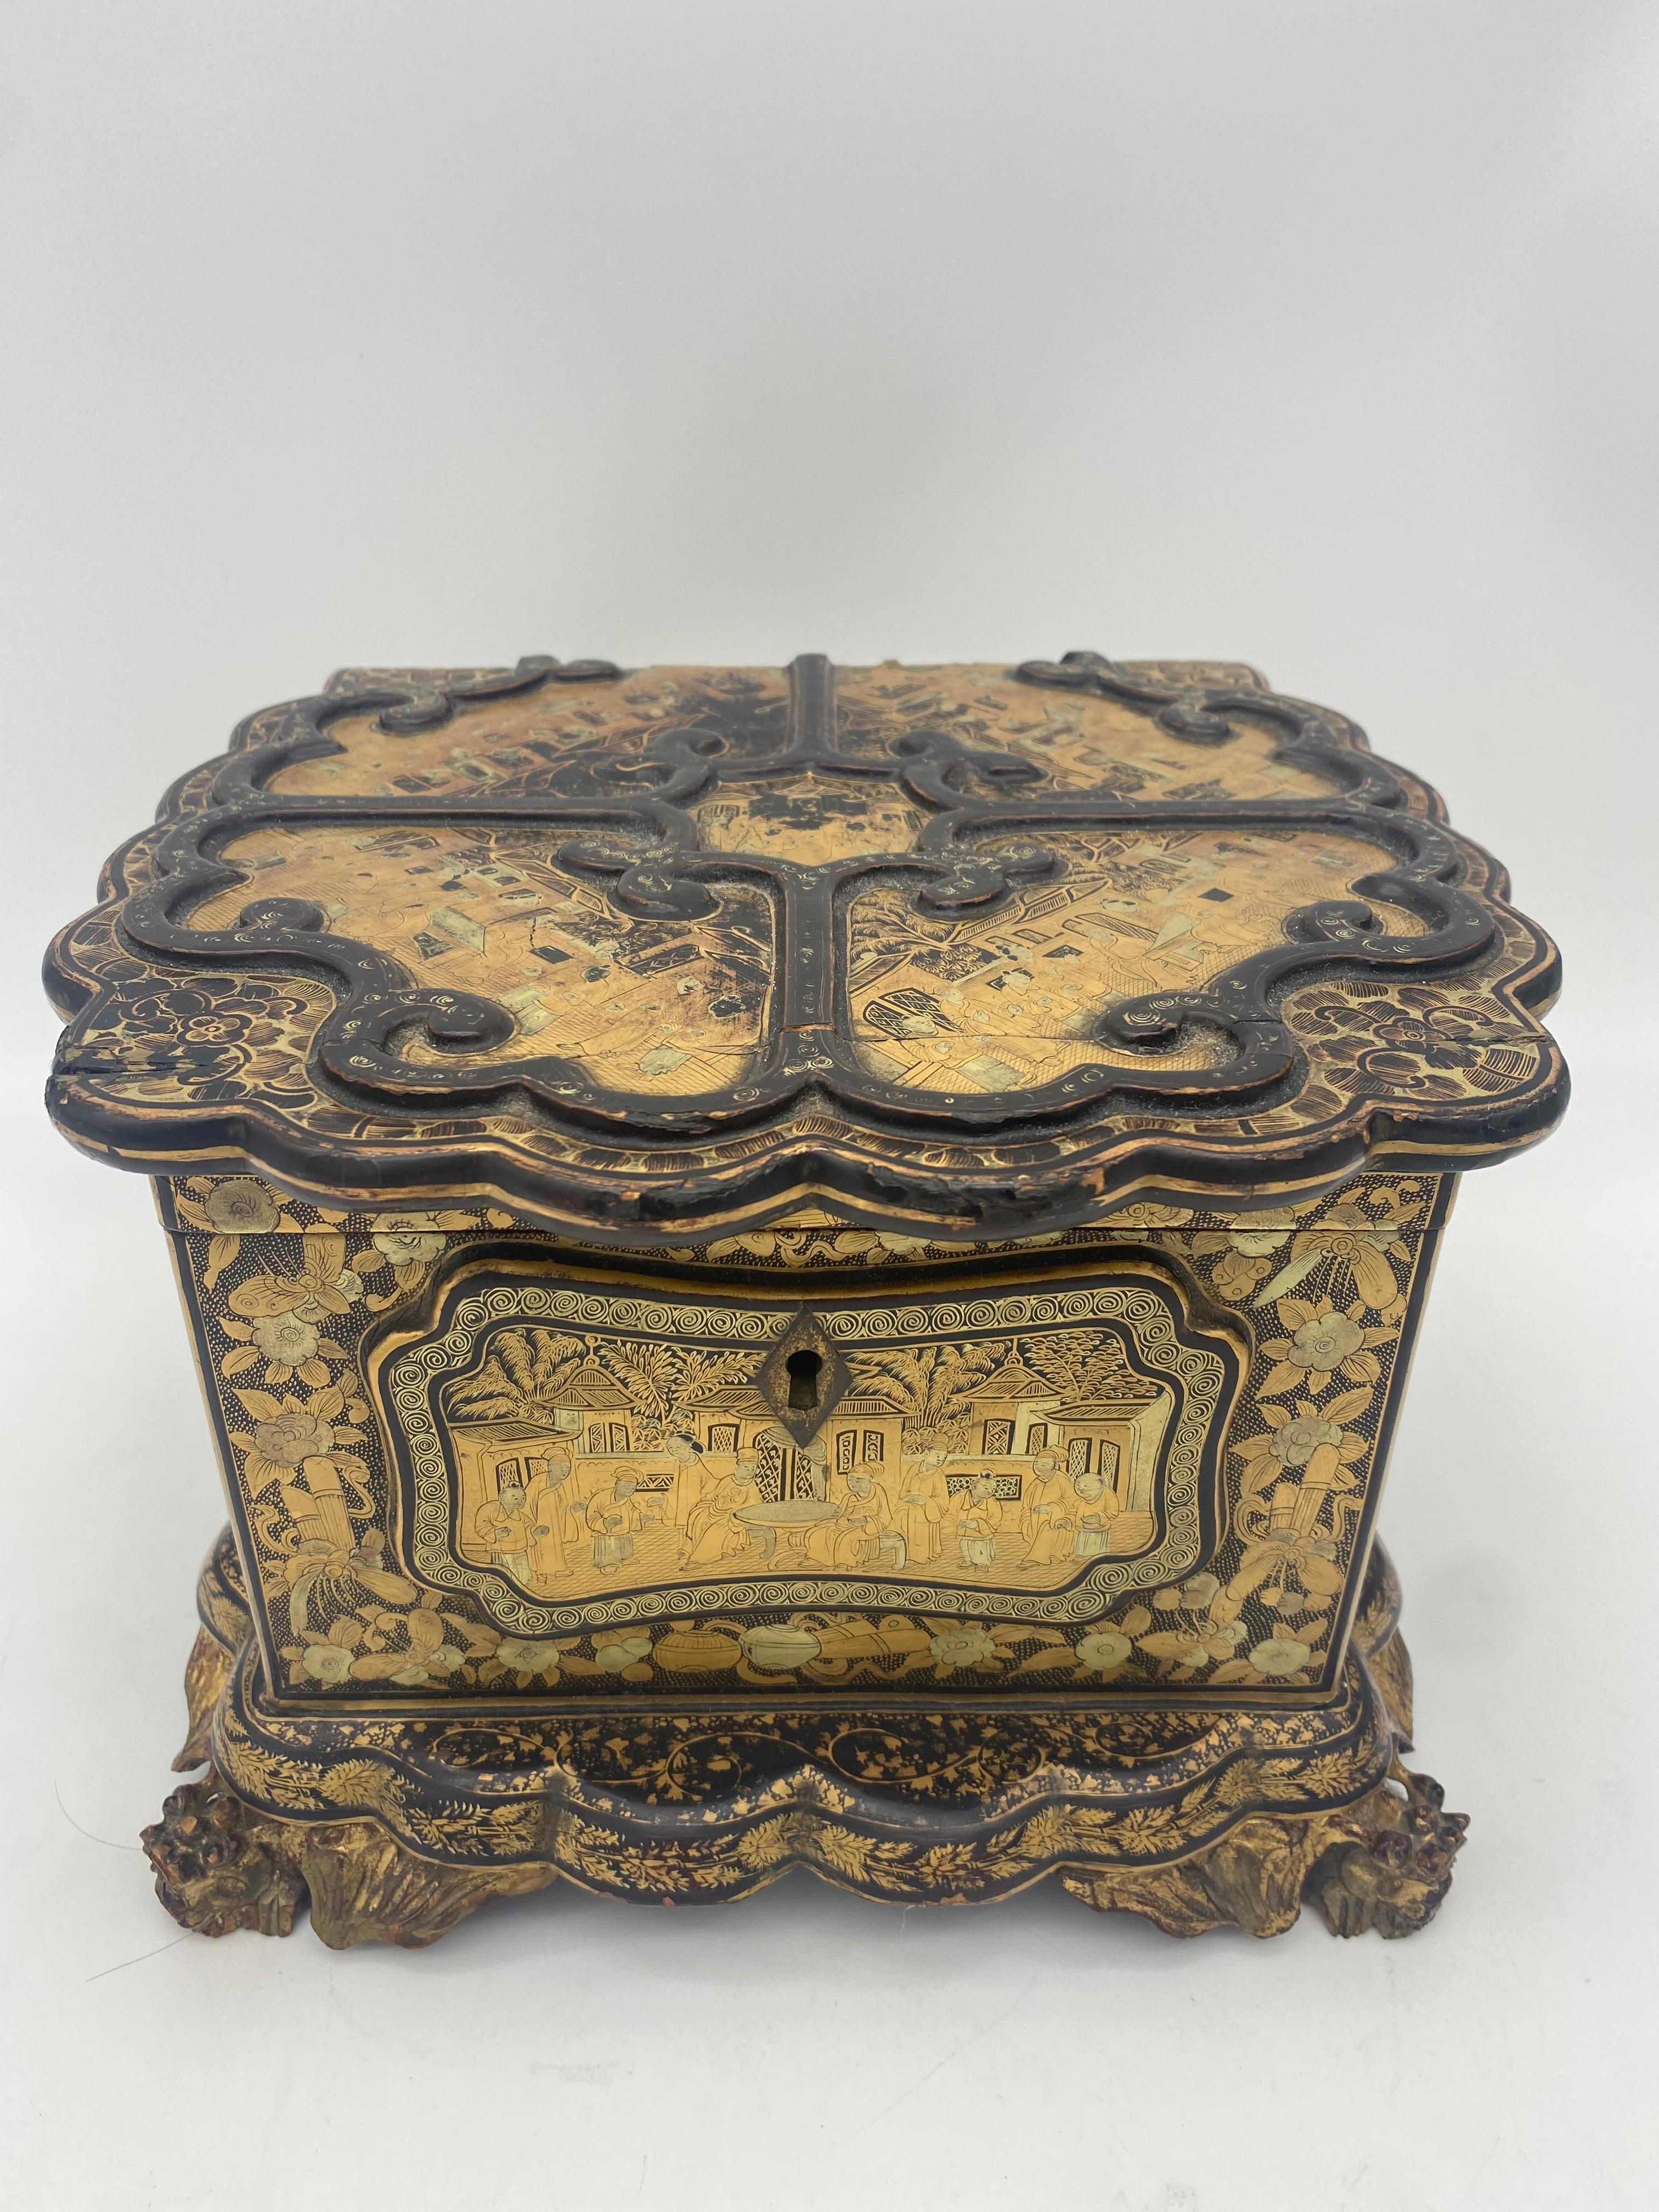 Unique 19th Century  Export Chinese Gilt Chinoiserie Lacquer Box For Sale 8